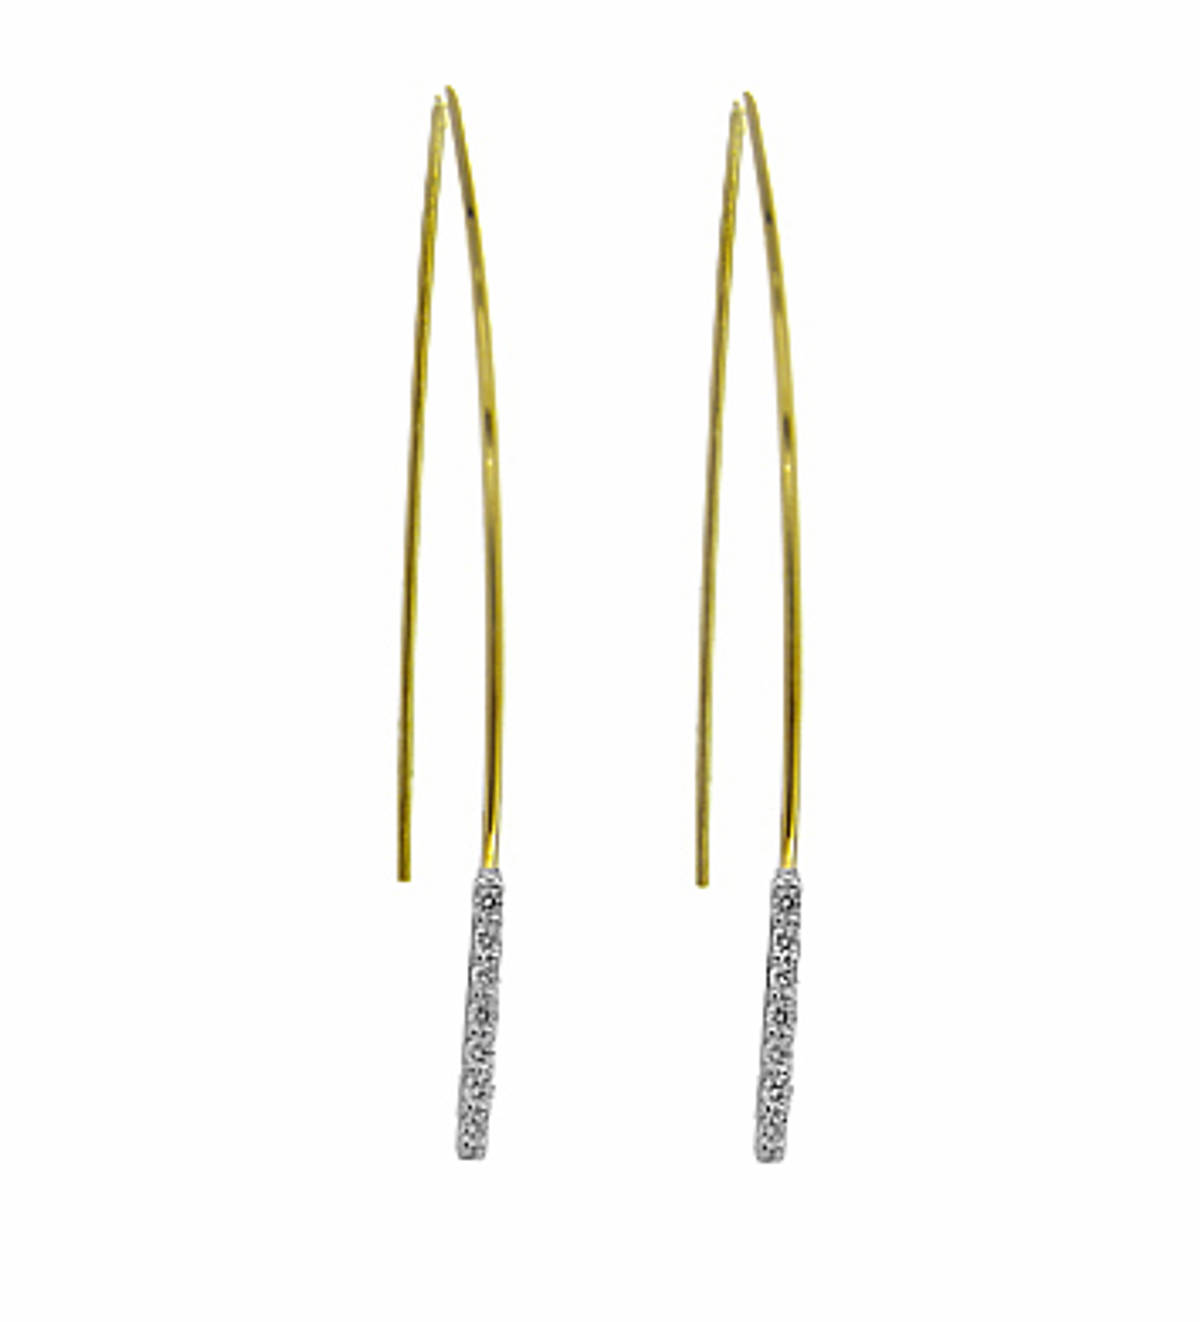 9k yellow gold brilliant cut diamond hoop earringsDETAILSCarat: total diamond weight 0.21cts SIZE & FITThis item’s measurements are:Drop  6cm